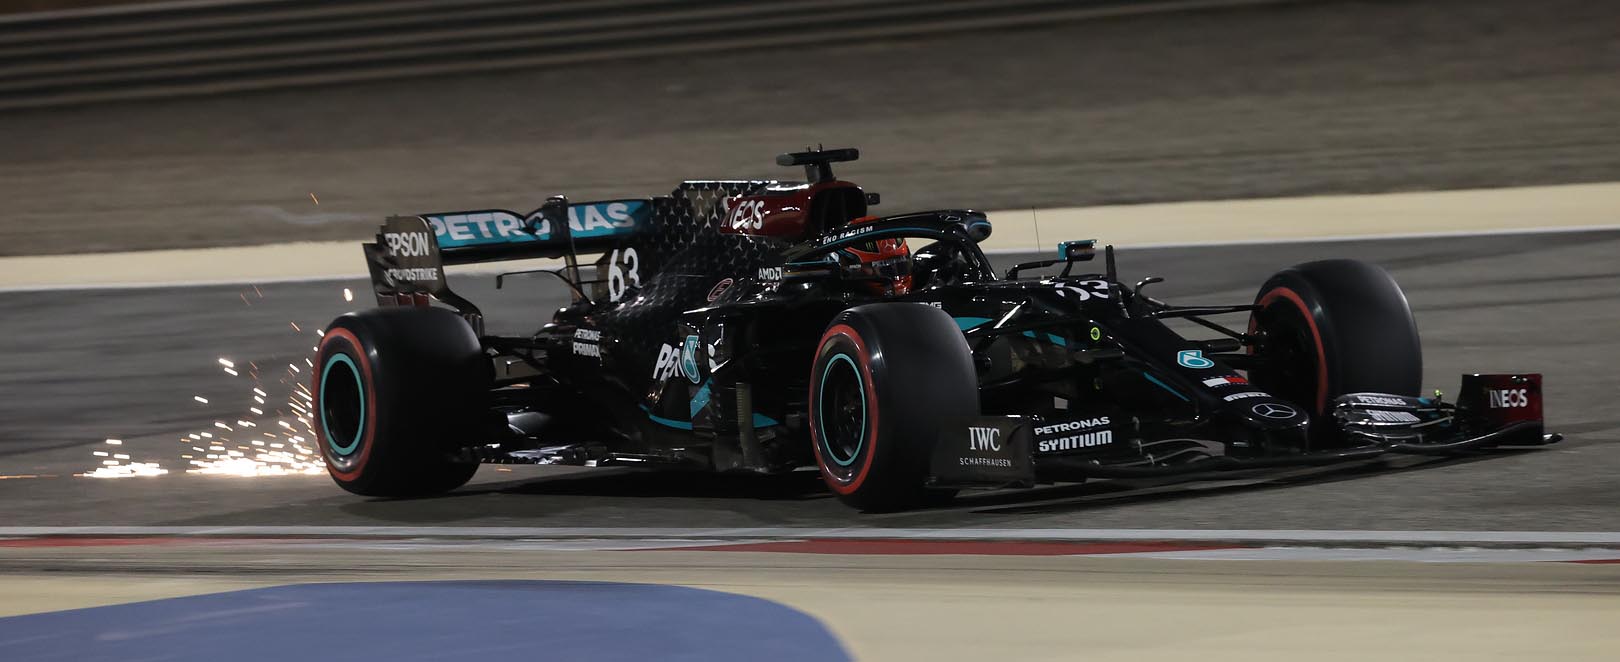 George Russell in his Mercedes Formula 1 car at the 2020 Sakhir Grand Prix